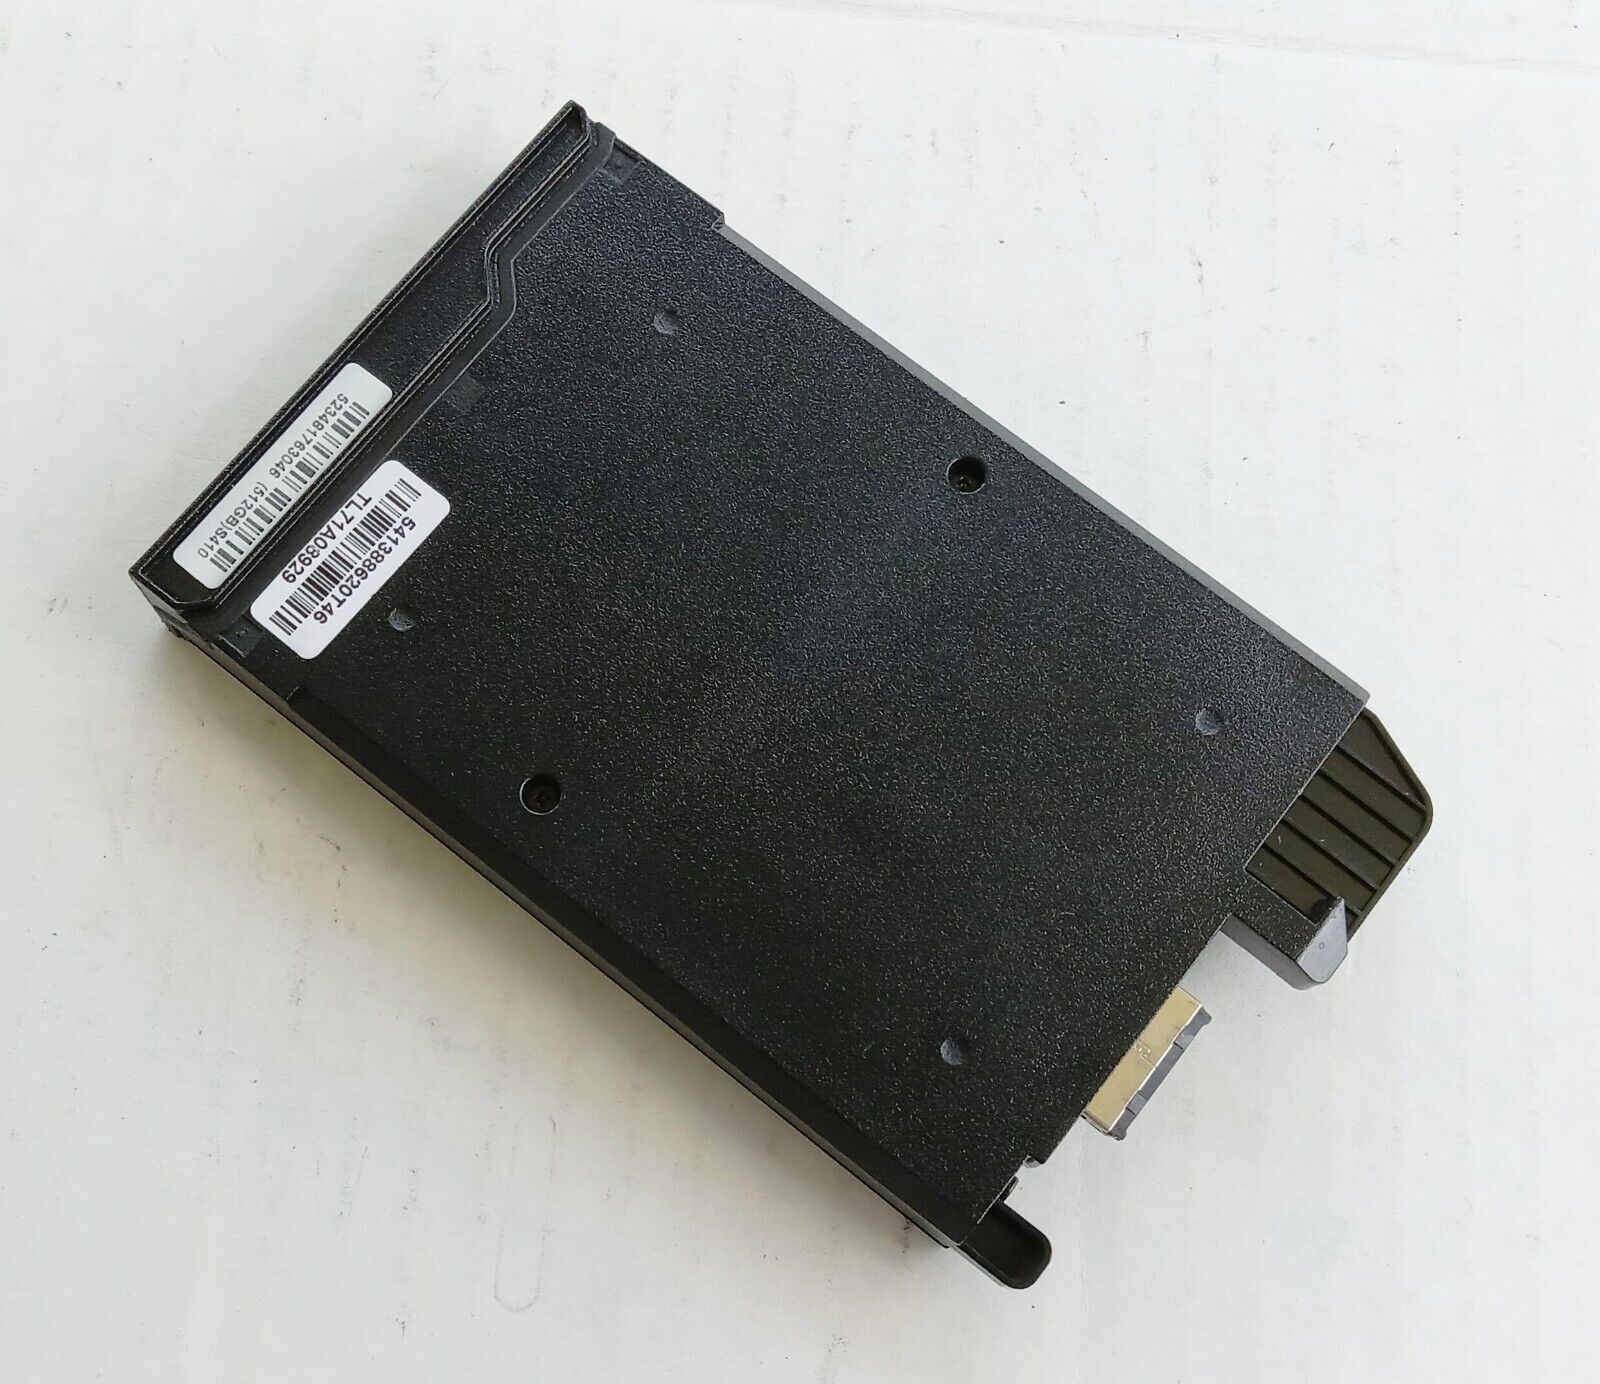 Genuine OEM Getac S410 M.2 SSD Solid State Drive Caddy Canister Complete